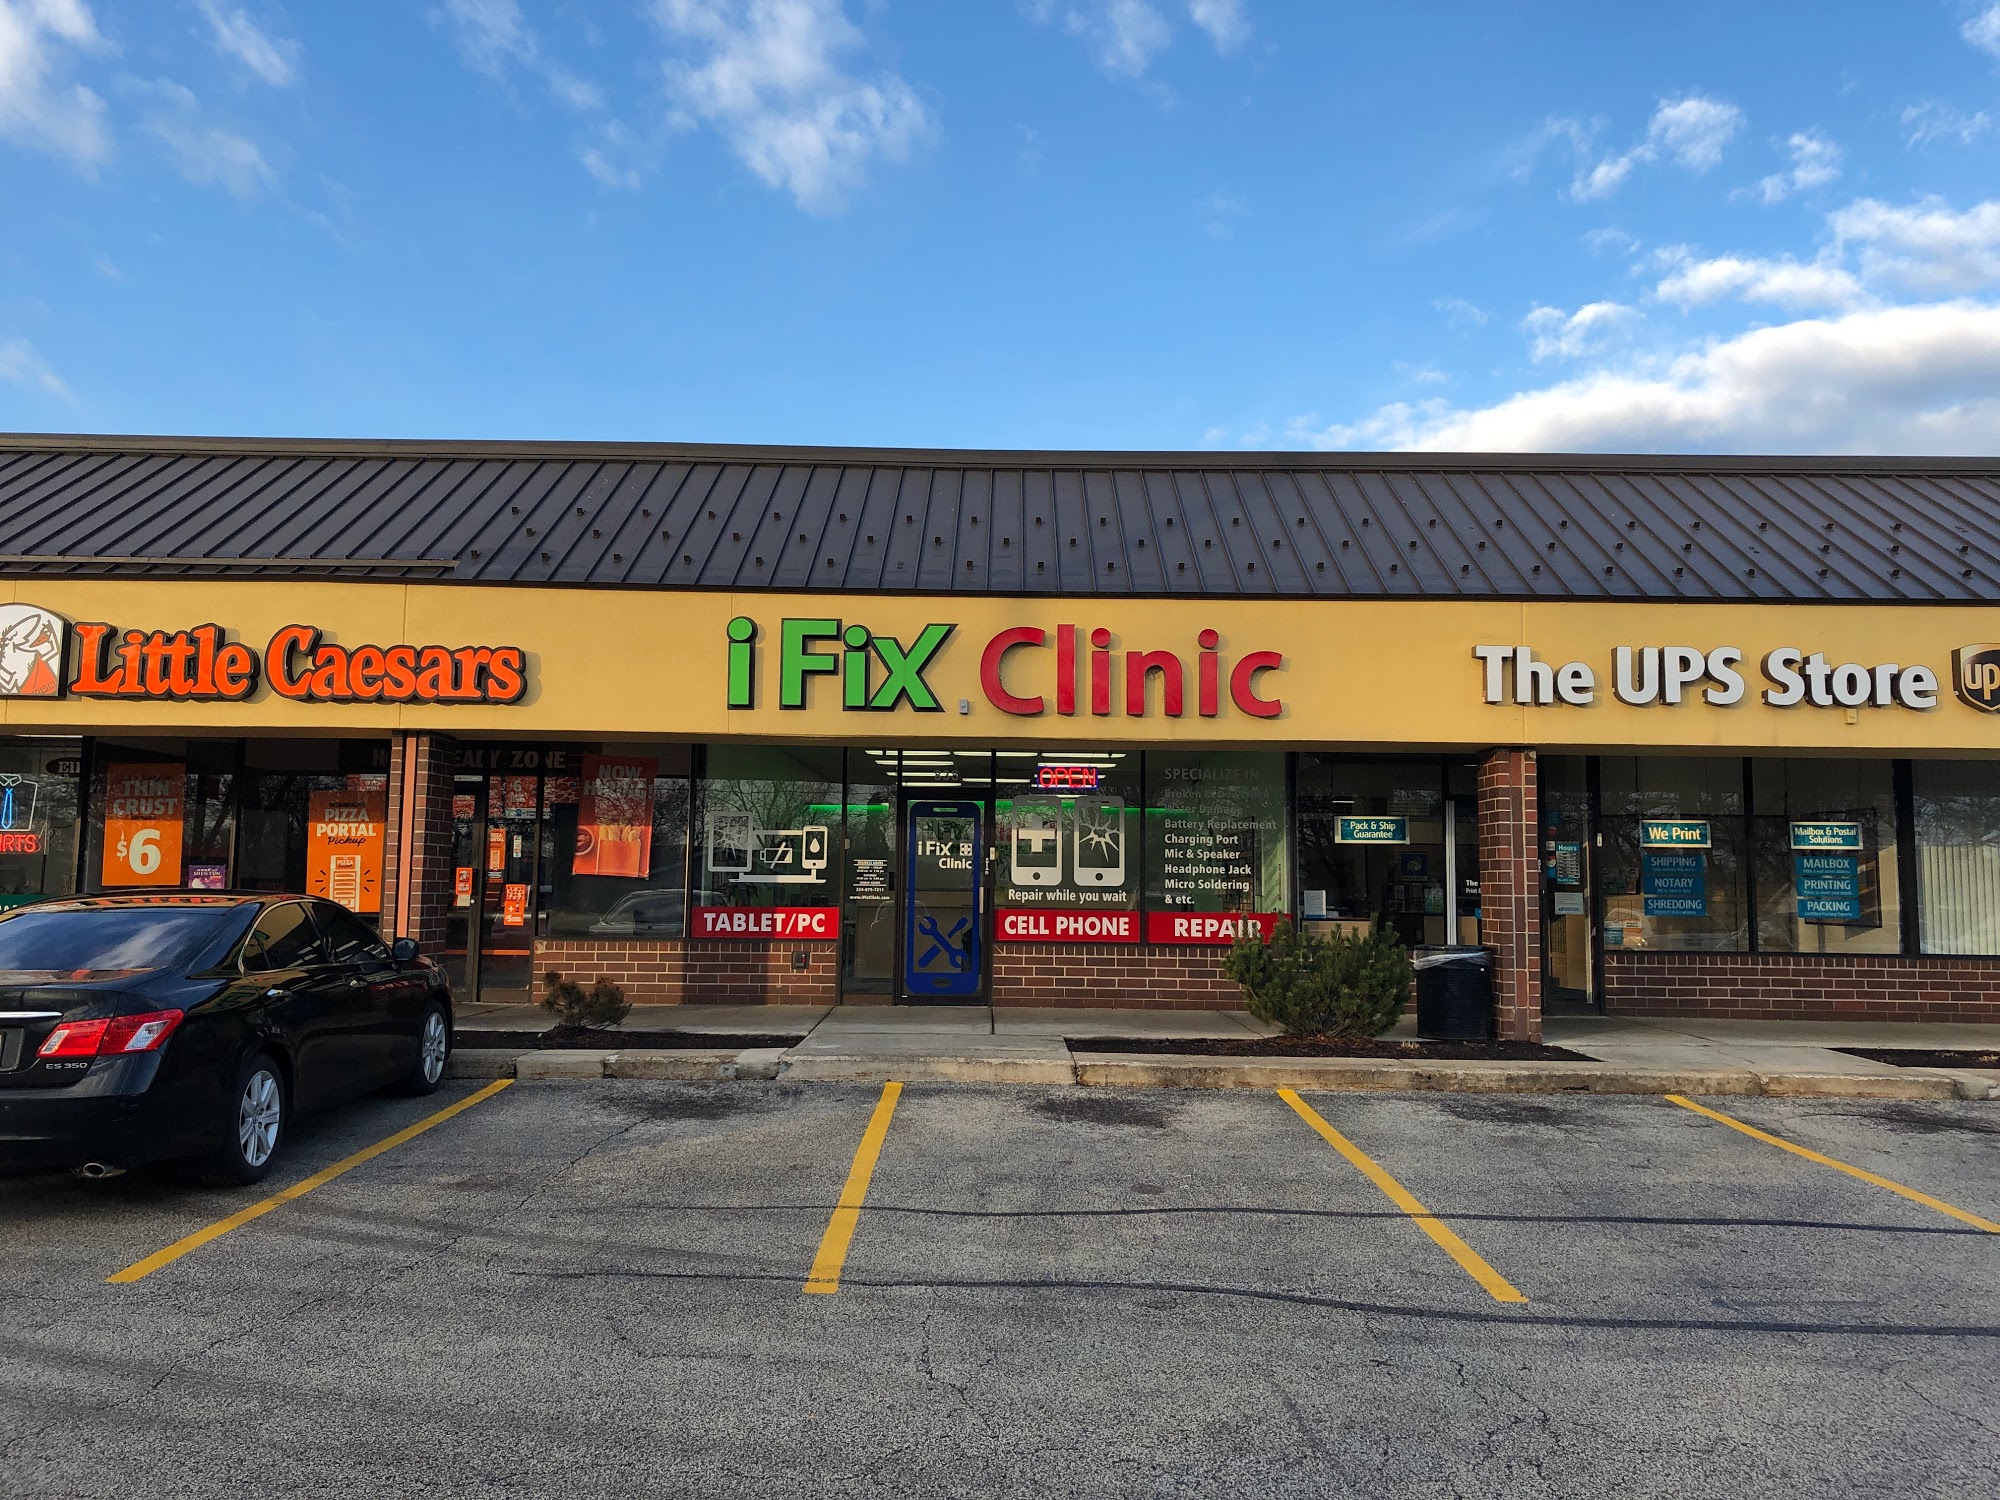 iFix Clinic - Cell Phone, Tablet, PC REPAIR